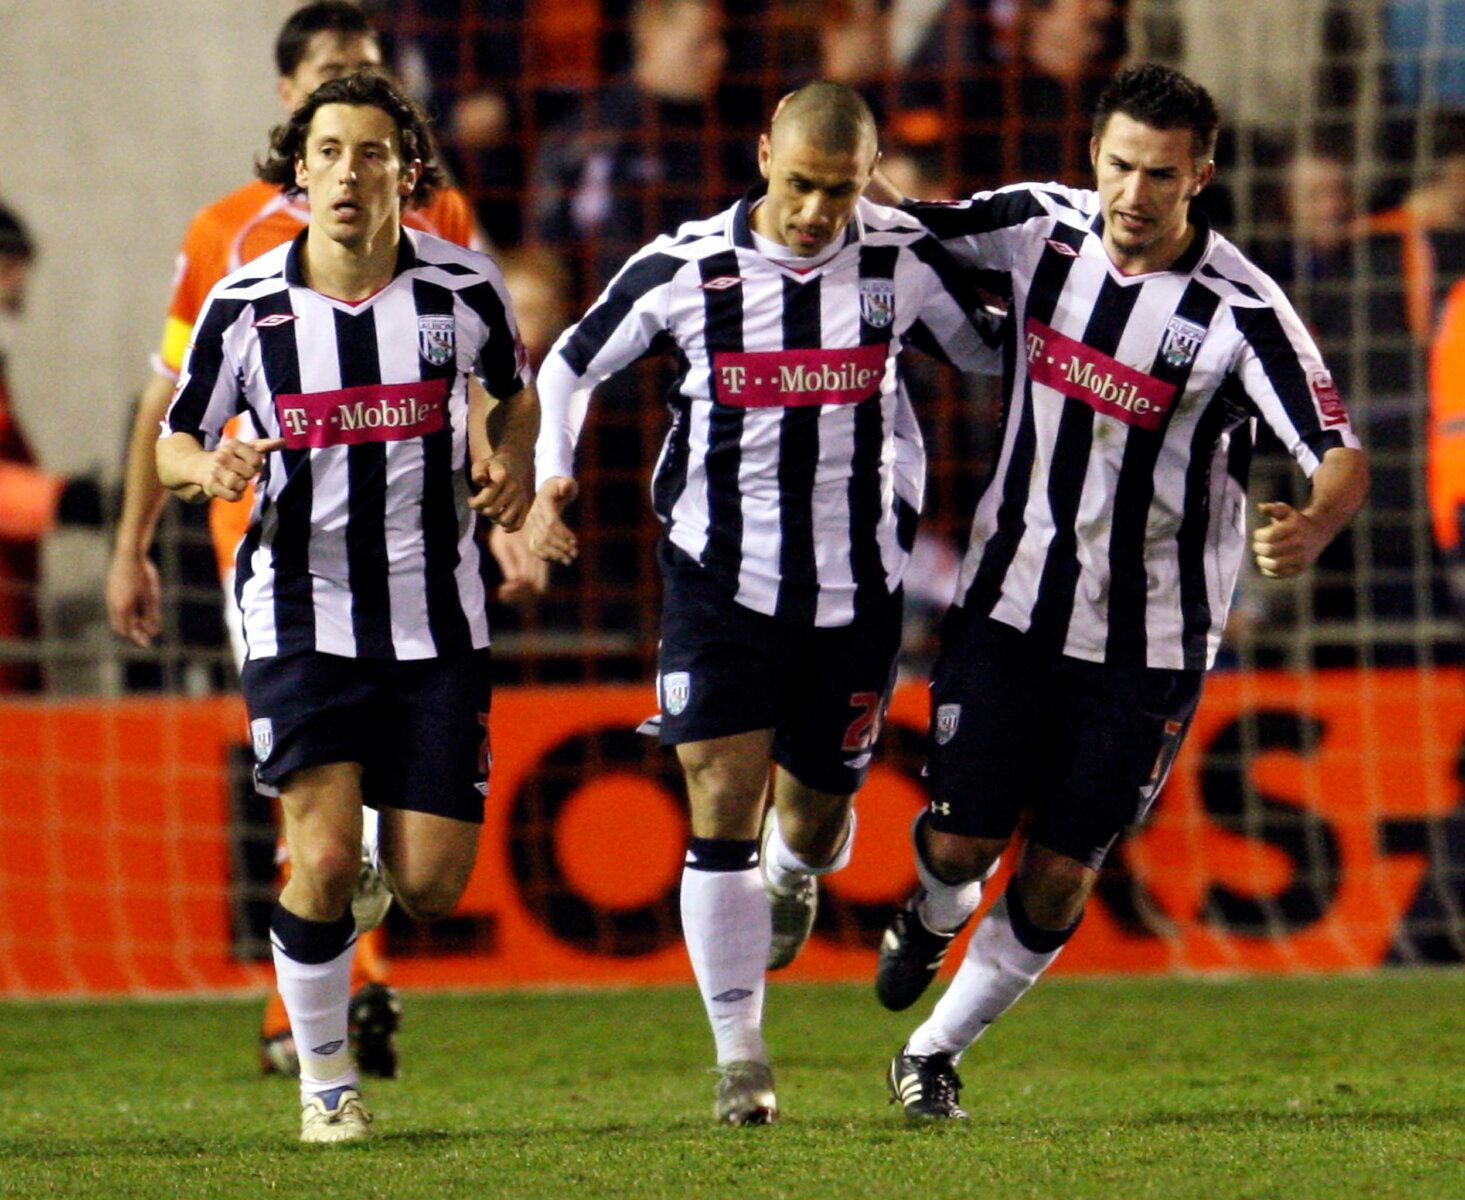 Football - Blackpool v West Bromwich Albion  Coca-Cola Football League Championship  - Bloomfield Road  - 8/4/08 
West Brom's Kevin Phillips (L) celebrates scoring their third goal Robert Koren (L) and Carl Hoefkens (R) 
Mandatory Credit: Action Images / John Clifton 
Livepic